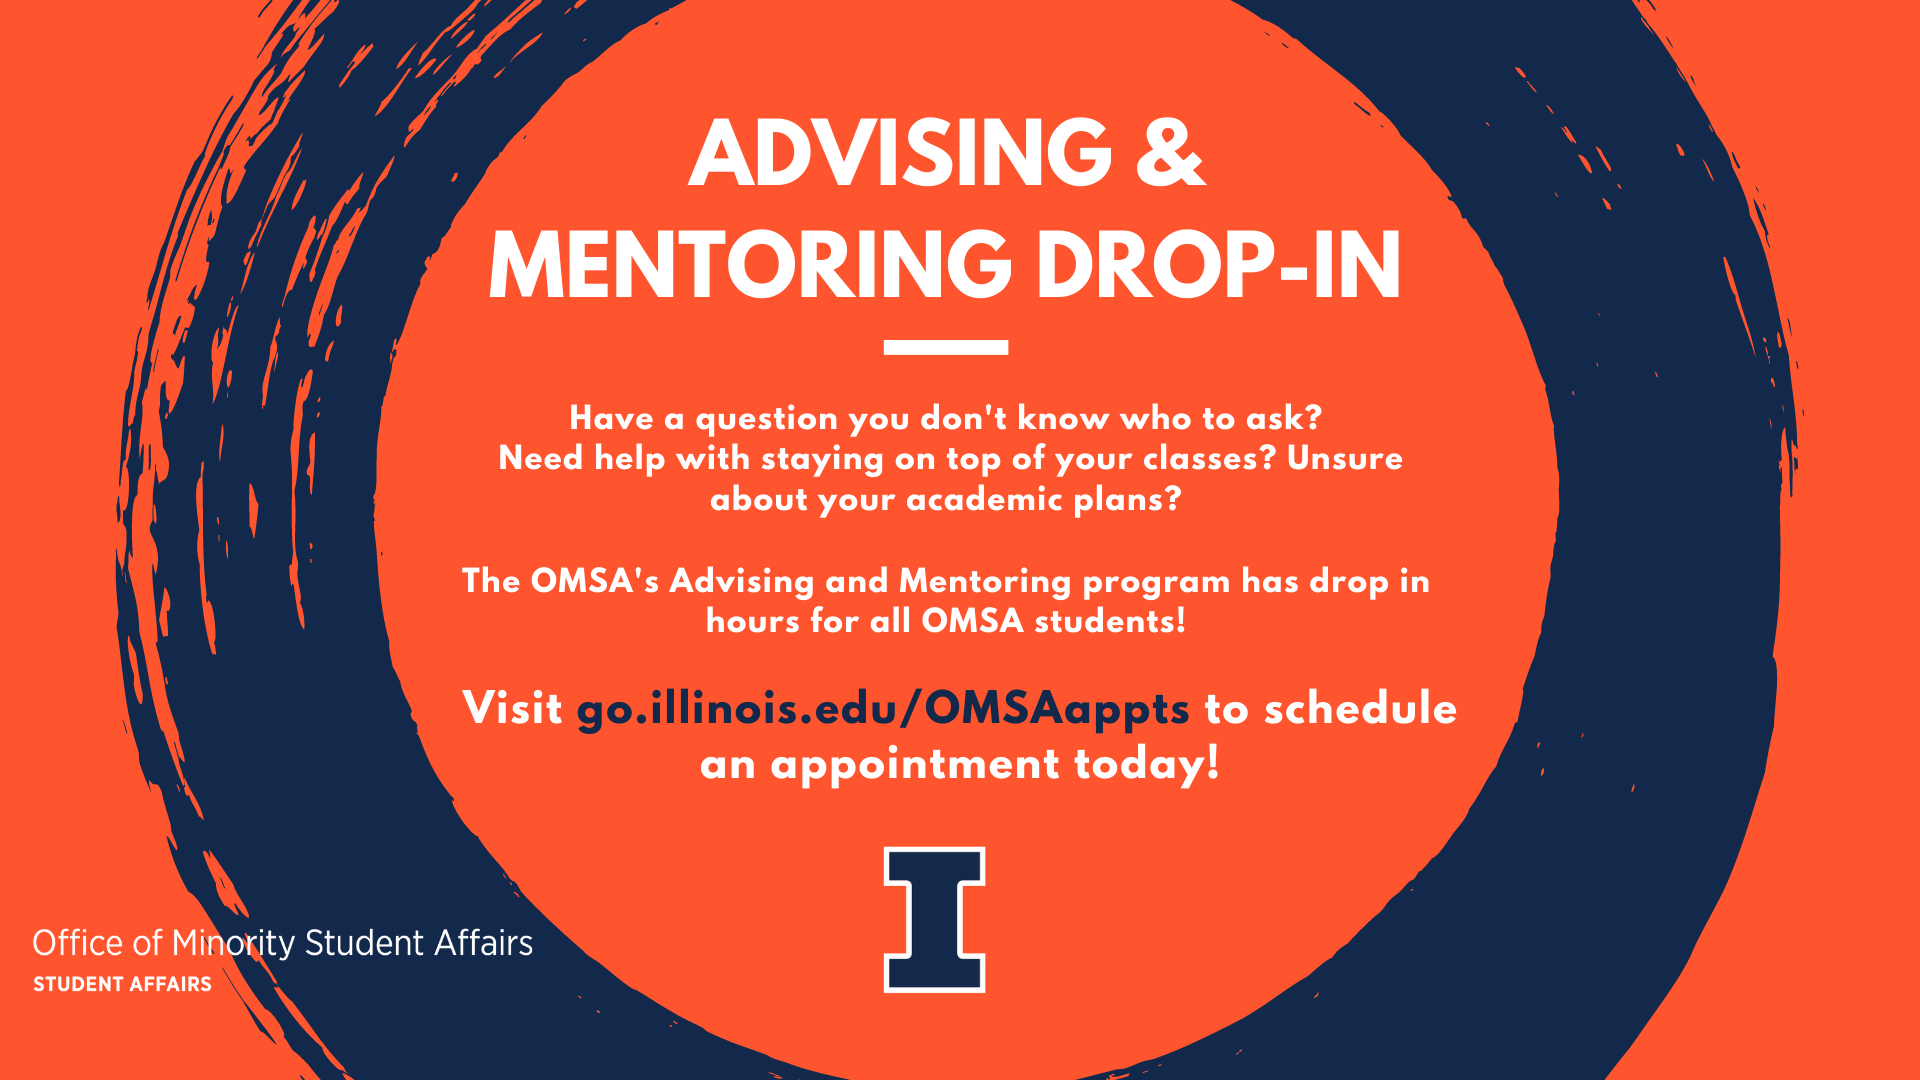 OMSA Advising and Mentoring Drop-In graphic